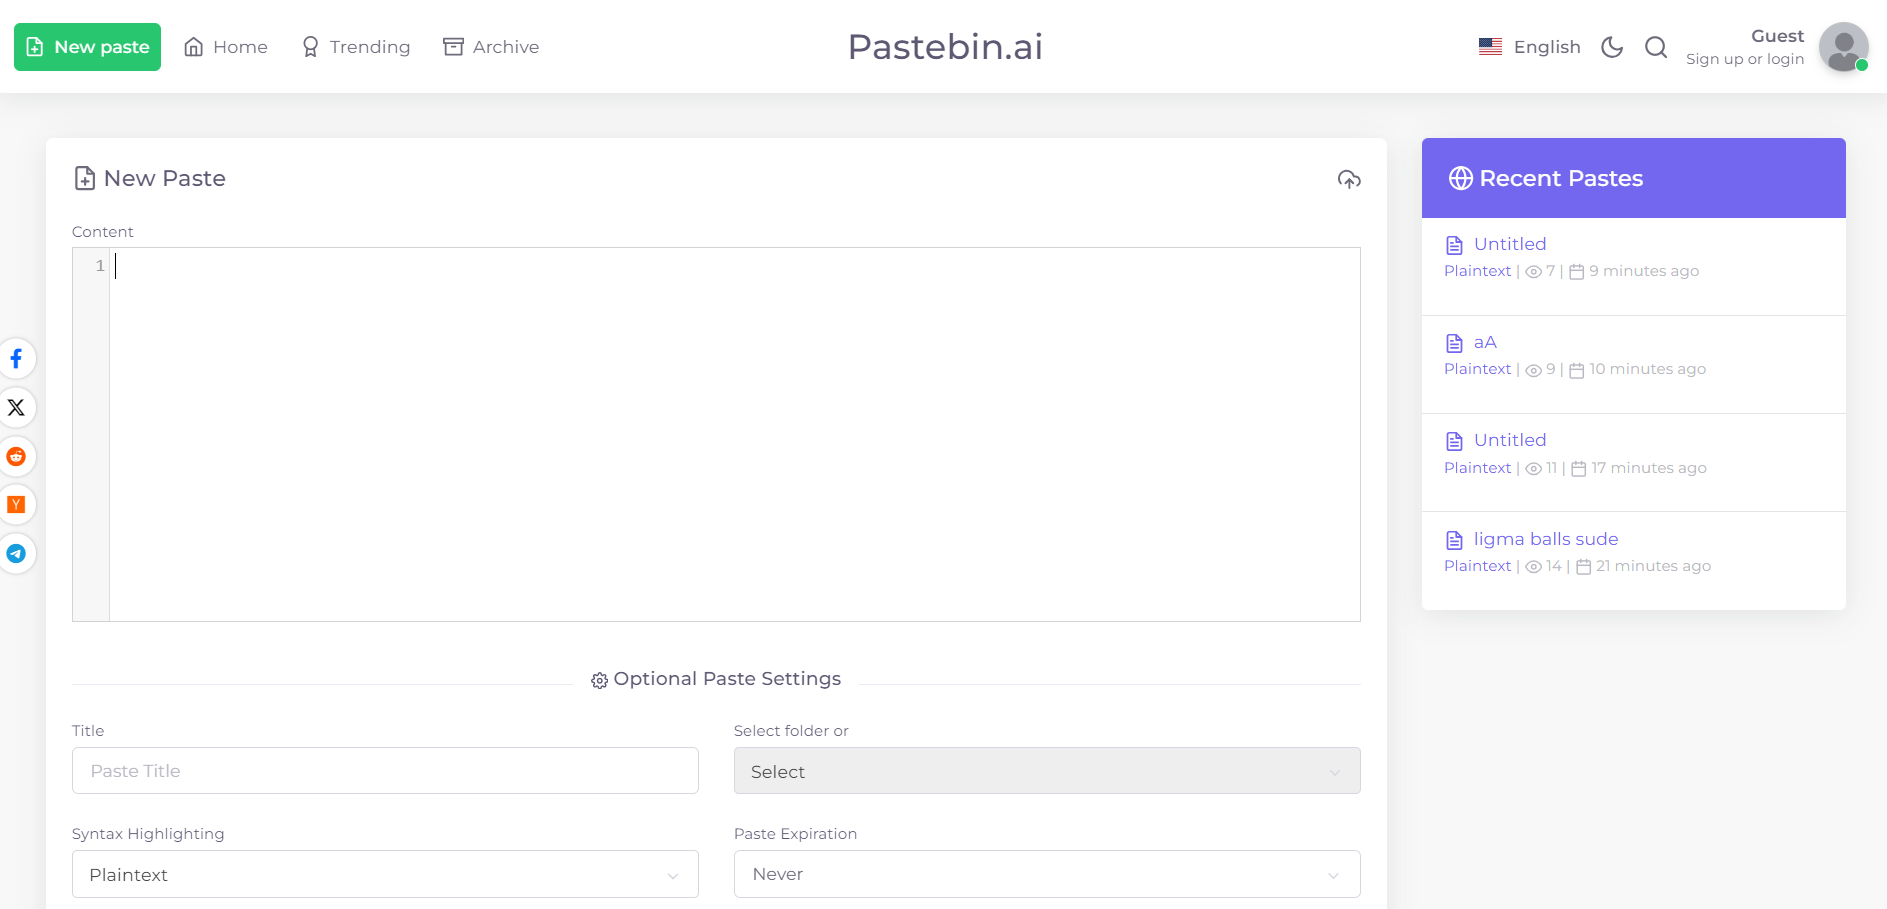 pastebin-ai - Simple and efficient pastebin for mainly code